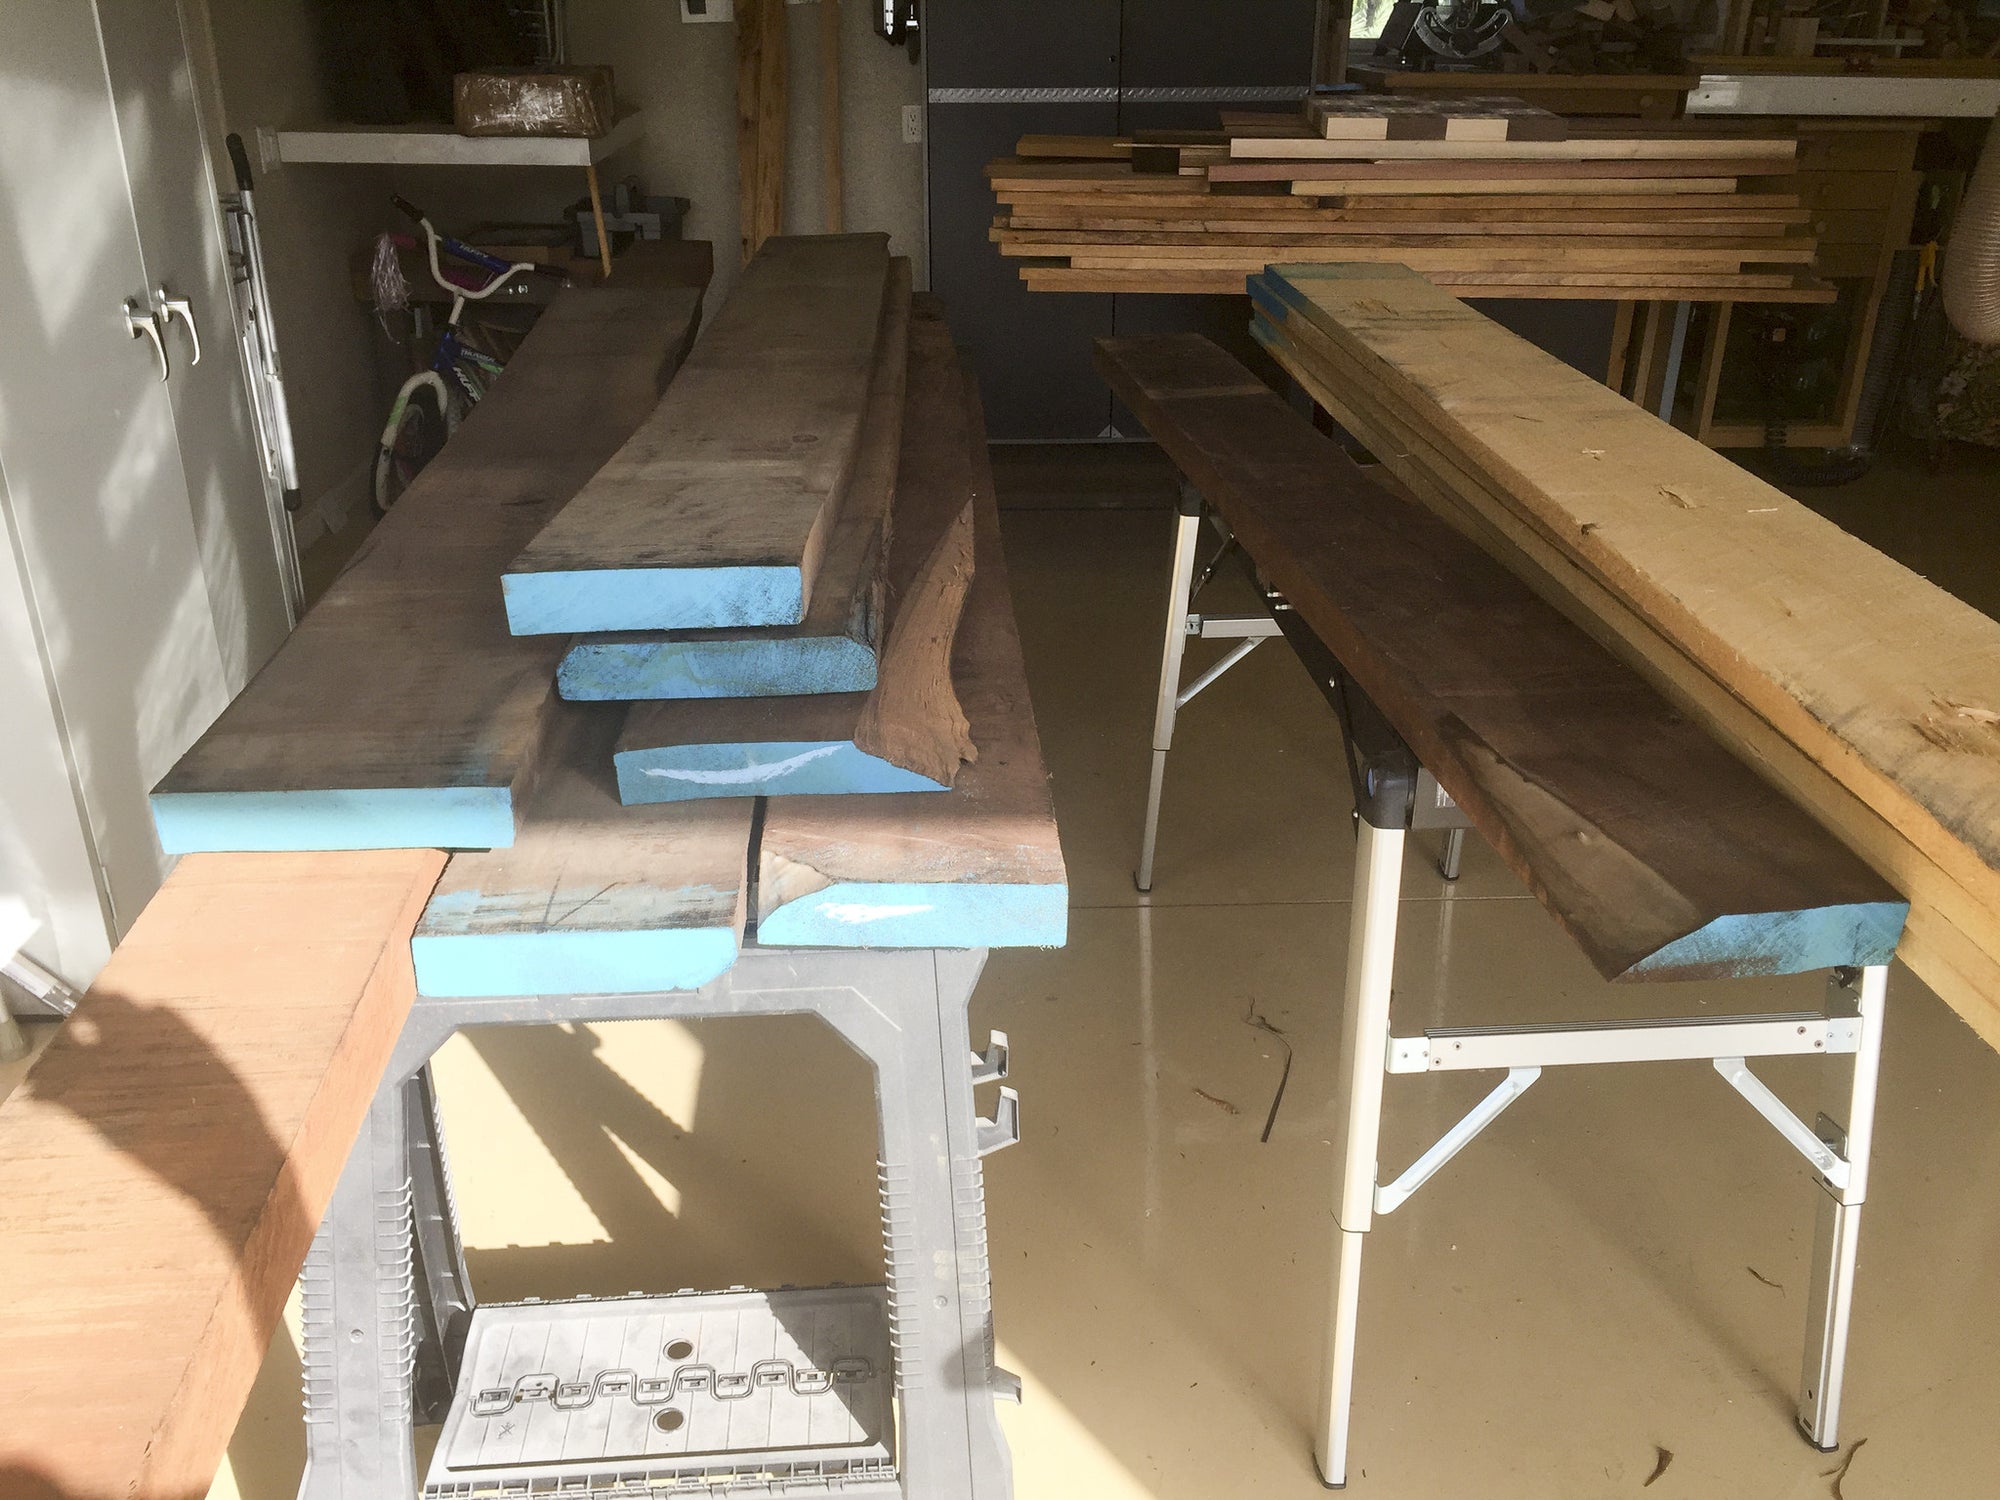 The Space Saving Bench Table (modified to your specifications)